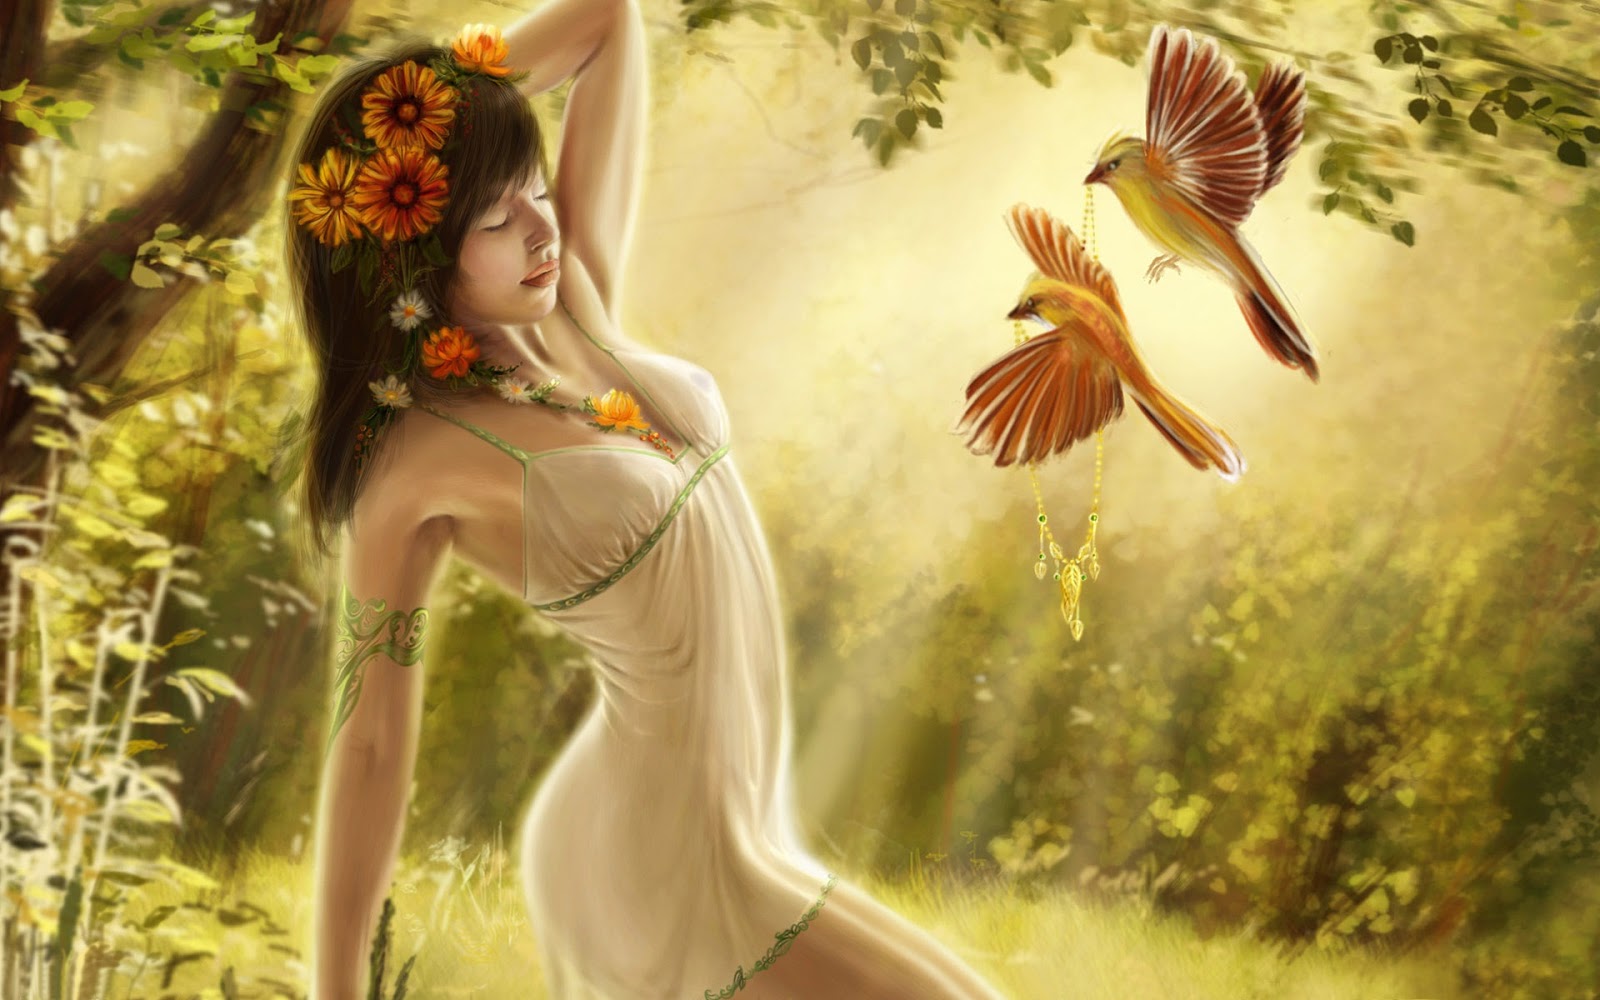 beautiful wallpapers of facebook,people in nature,cg artwork,fictional character,angel,mythology